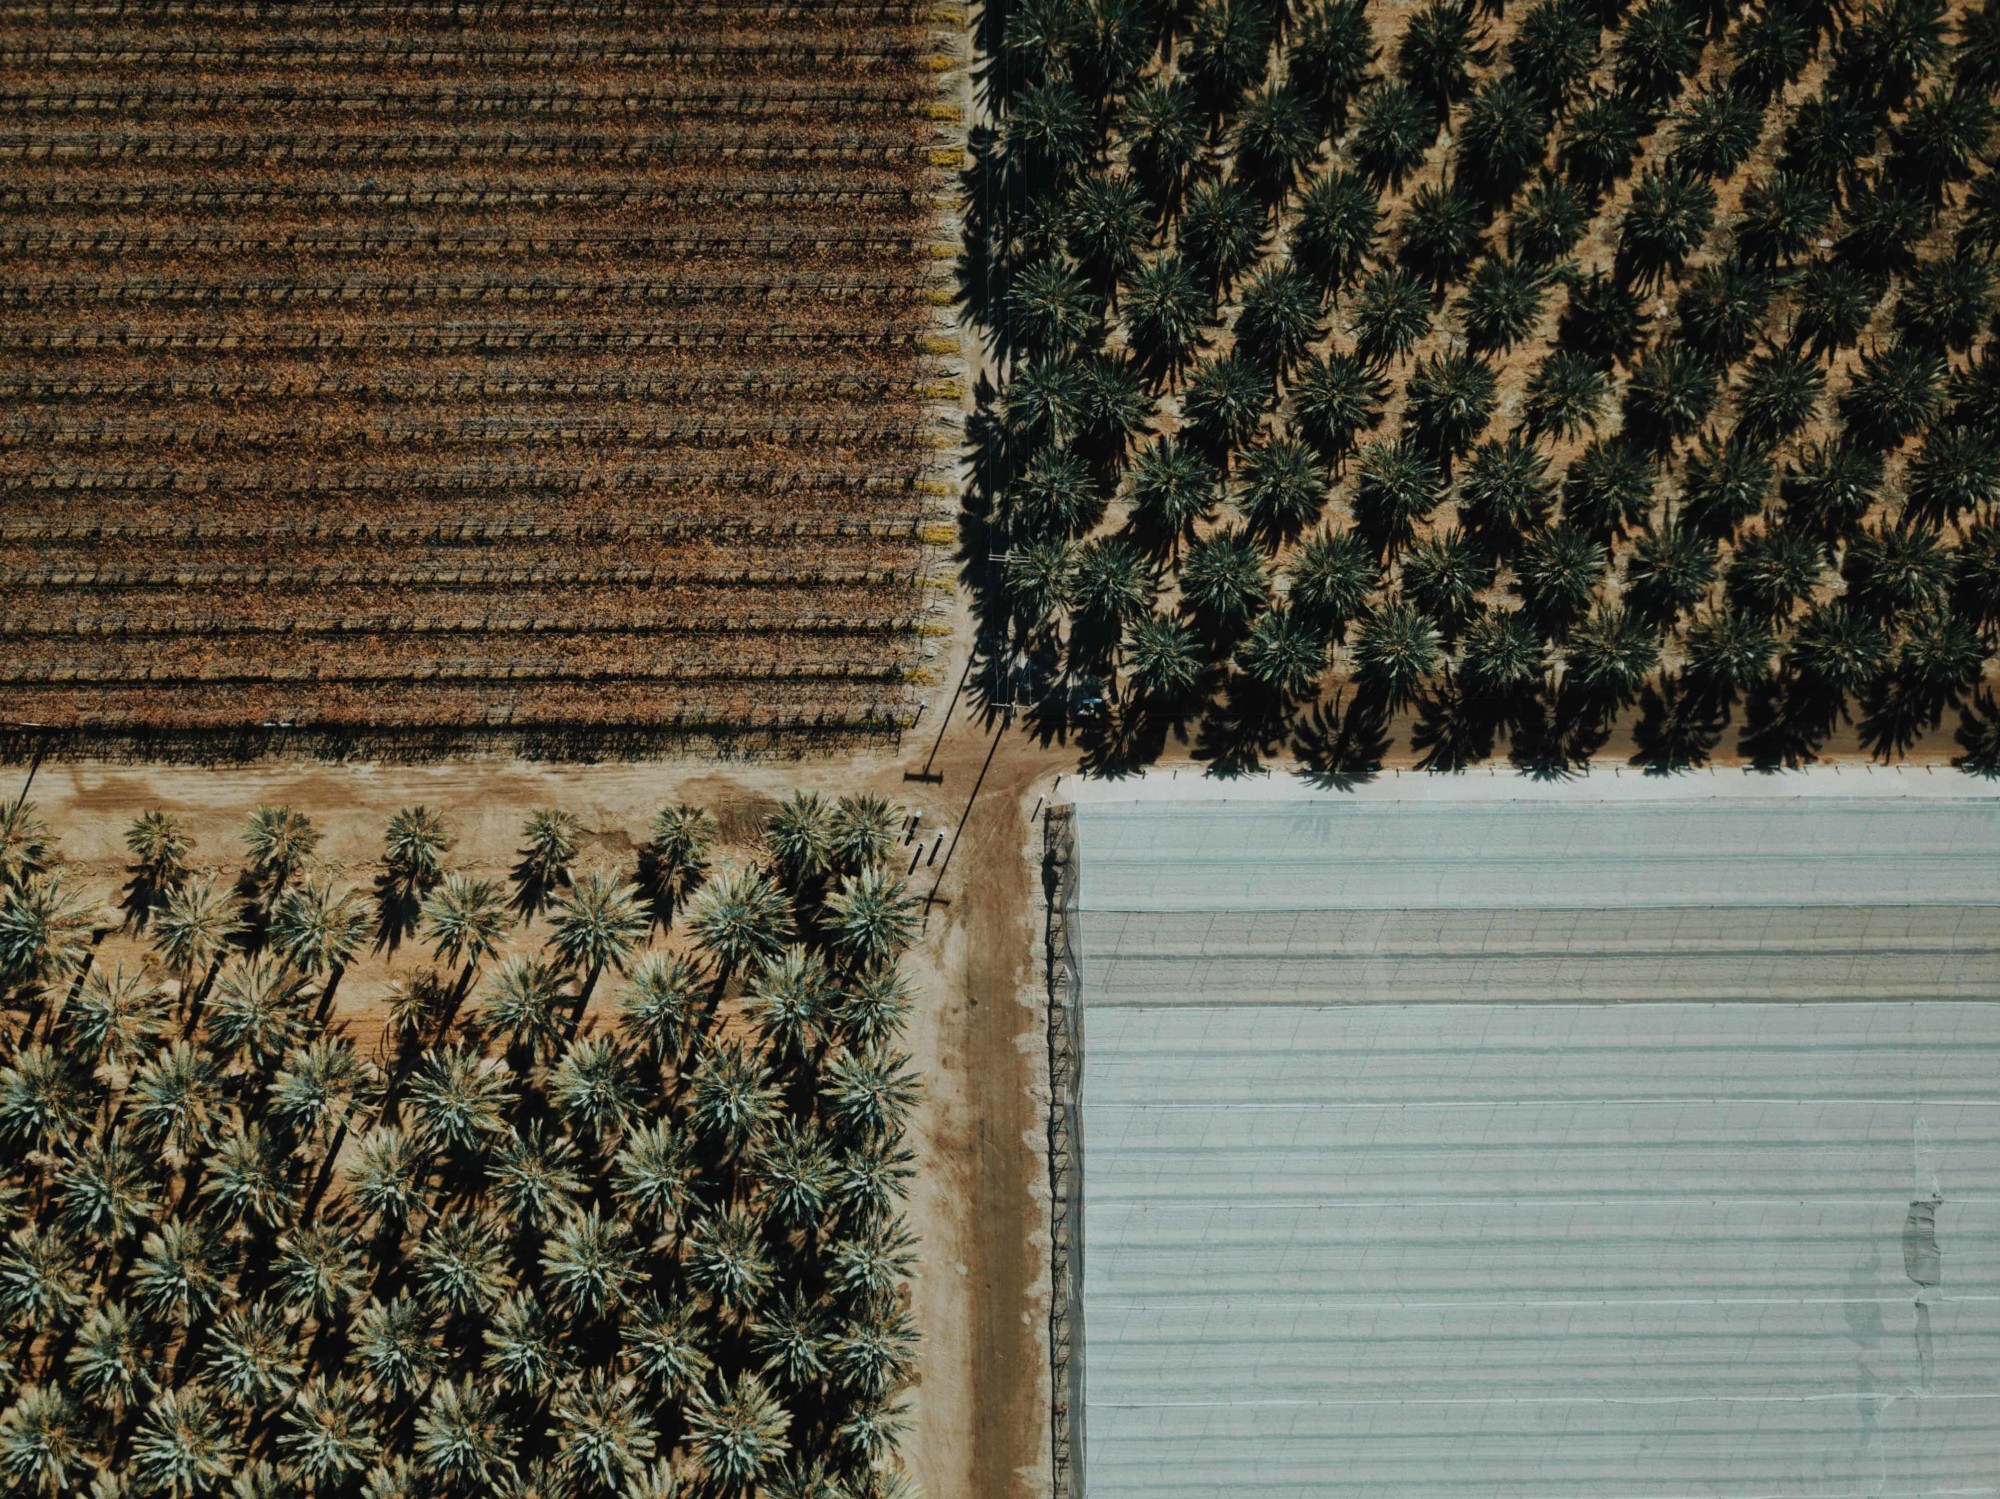 Drone Farming: What Farmers Need to Know